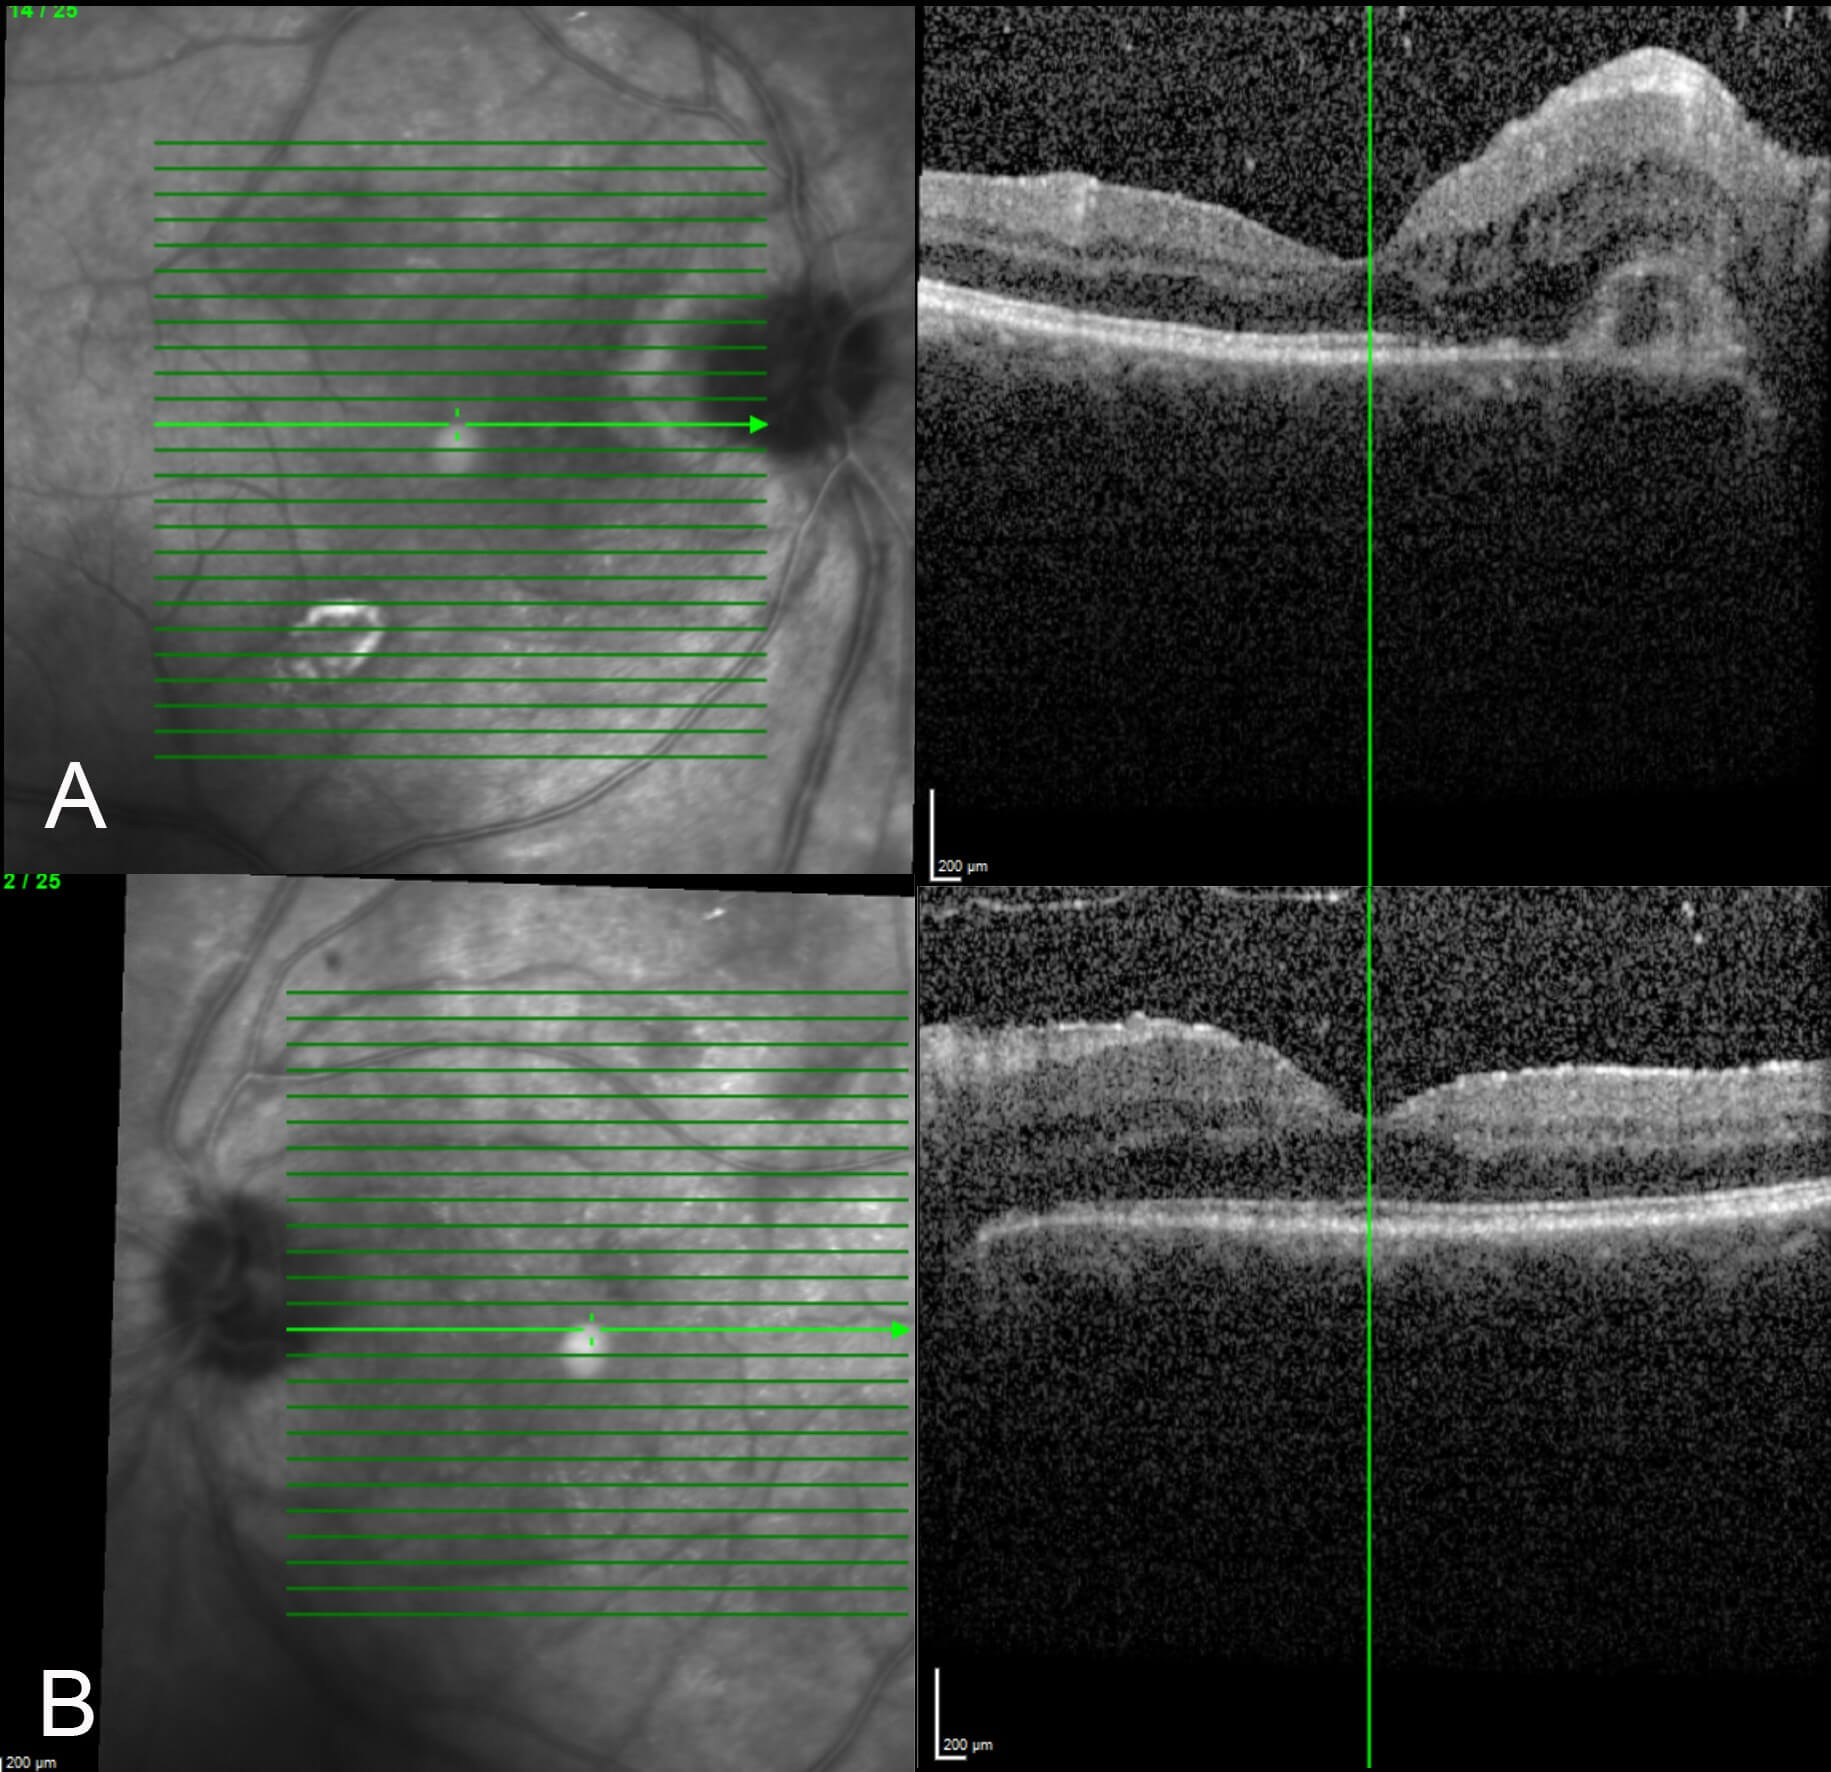 A) Optical coherence tomography through the right macula shows a subretinal hyper reflective lesion close to the optic disc with some subretinal and intraretinal fluid. The fovea is just spared. Vitreous cells are present. B) In the left eye there is some retinal thickening with a few intraretinal cystic changes close to the optic disc. Some vitreous cells are also present.